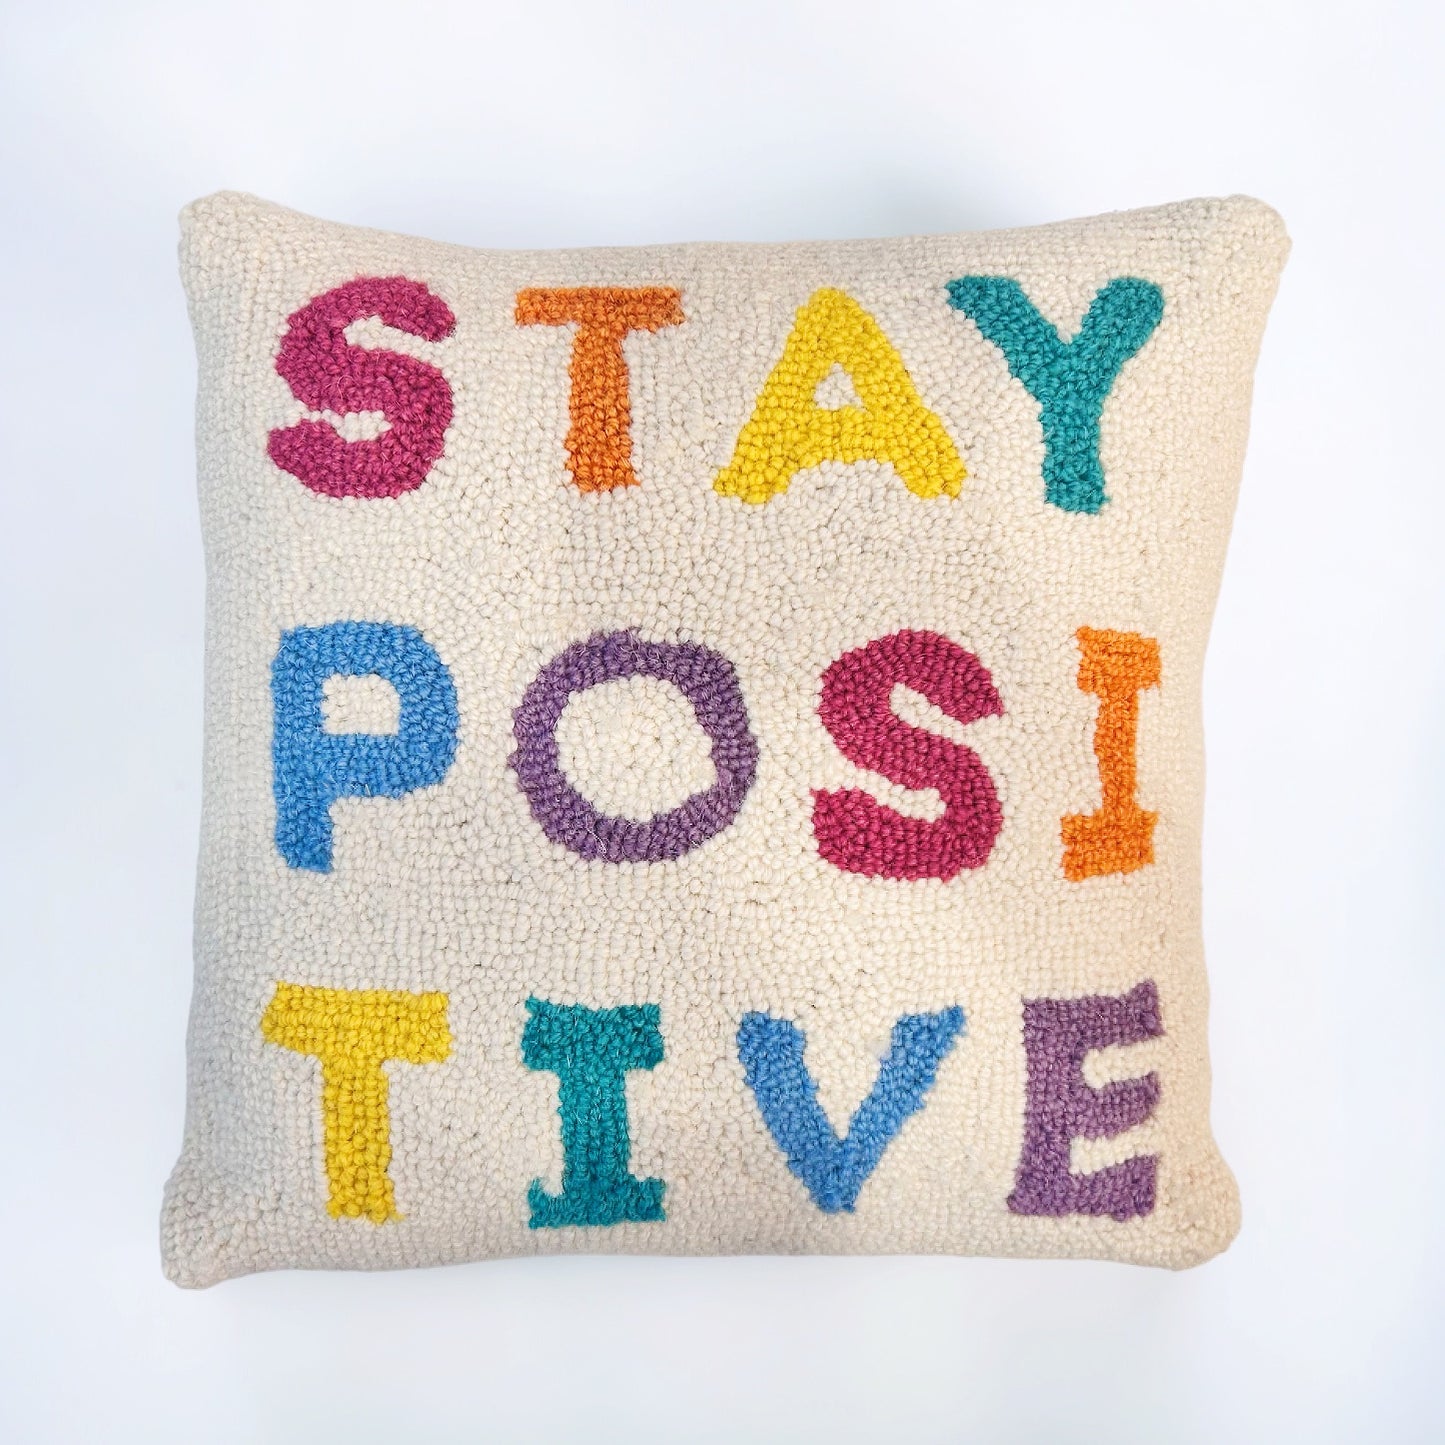 Stay Positive Rainbow Hooked Pillow